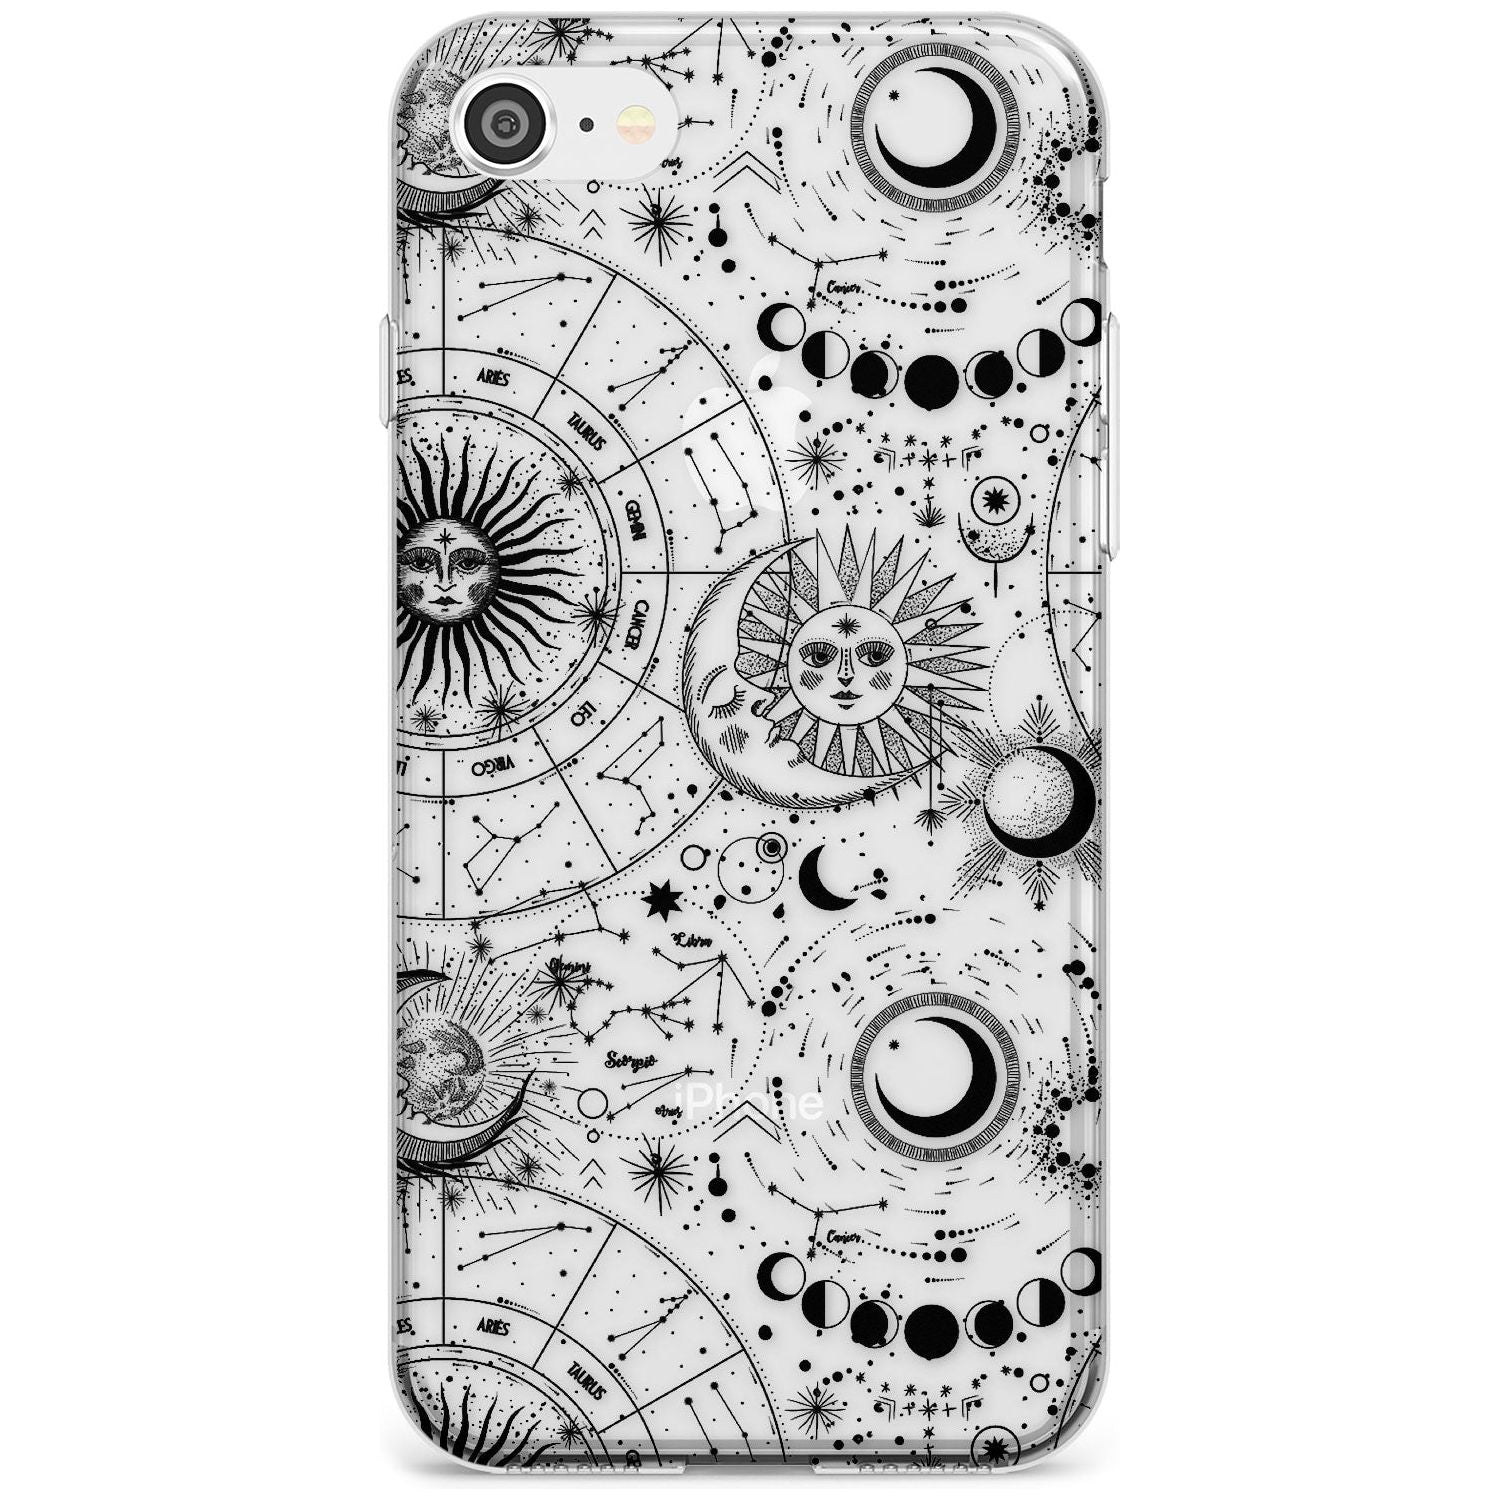 Suns, Moons, Zodiac Signs Astrological Slim TPU Phone Case for iPhone SE 8 7 Plus